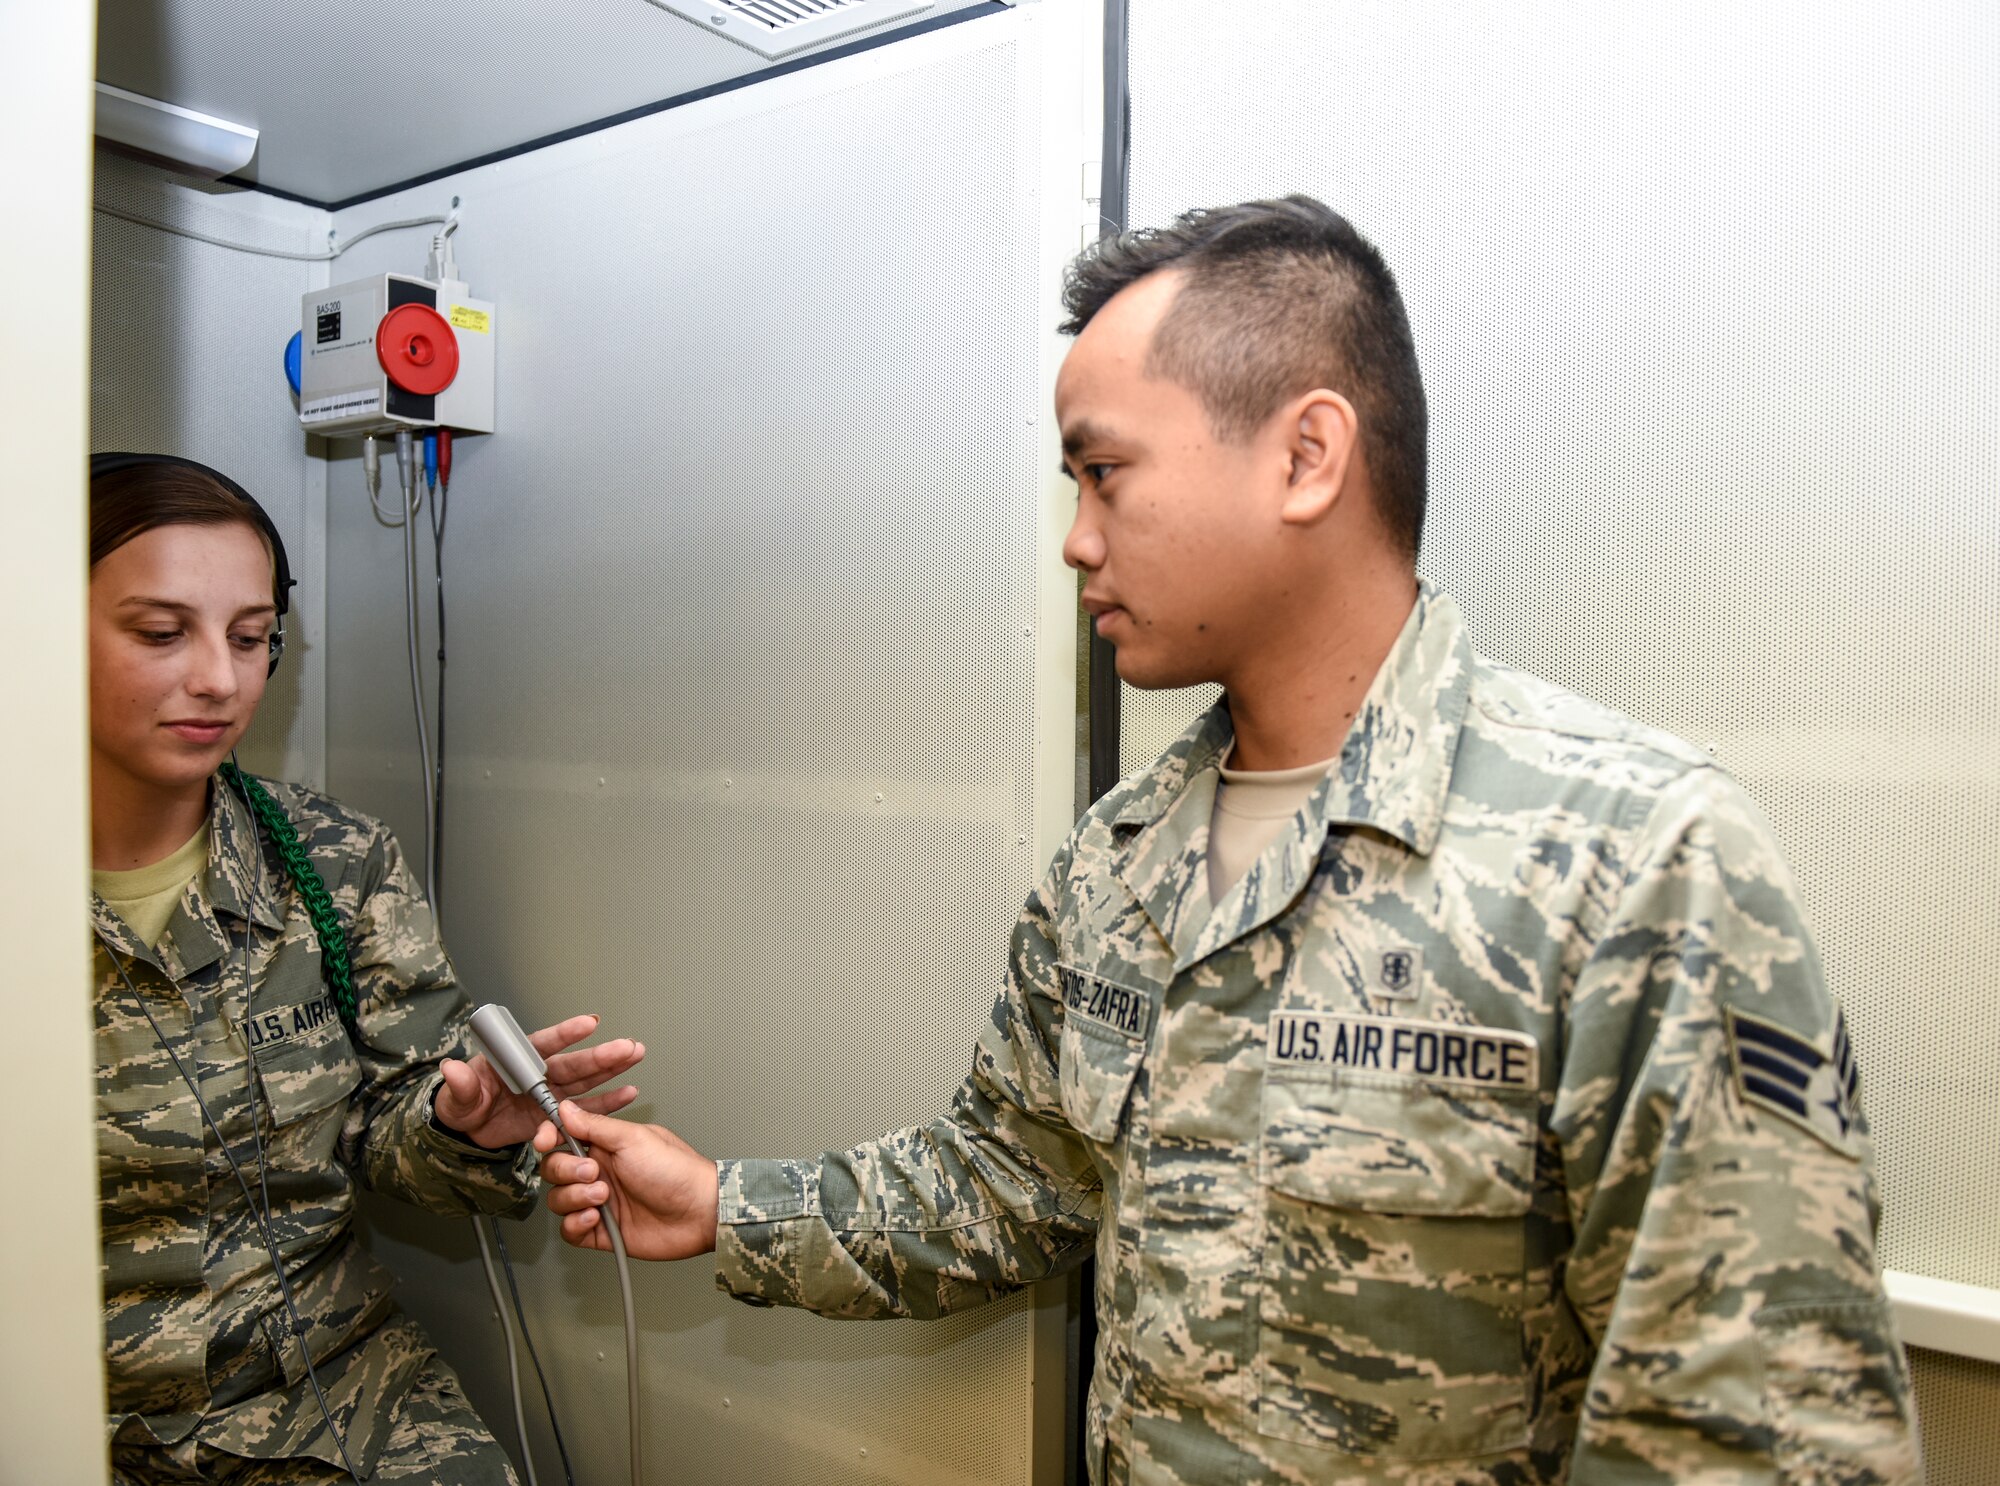 U.S. Air Force Senior Airman John Santos Zafra, 17th Medical Operations Squadron public health technician, conducts a hearing test with Airman Amberlee Welsh, 315th Training Squadron student, Goodfellow Air Force Base, Texas, Sept. 24, 2018. Zafra waited 4 1/2 years to become a naturalized citizen, starting the process in basic training (U.S. Air Force photo by Aryn Lockhart/Released).